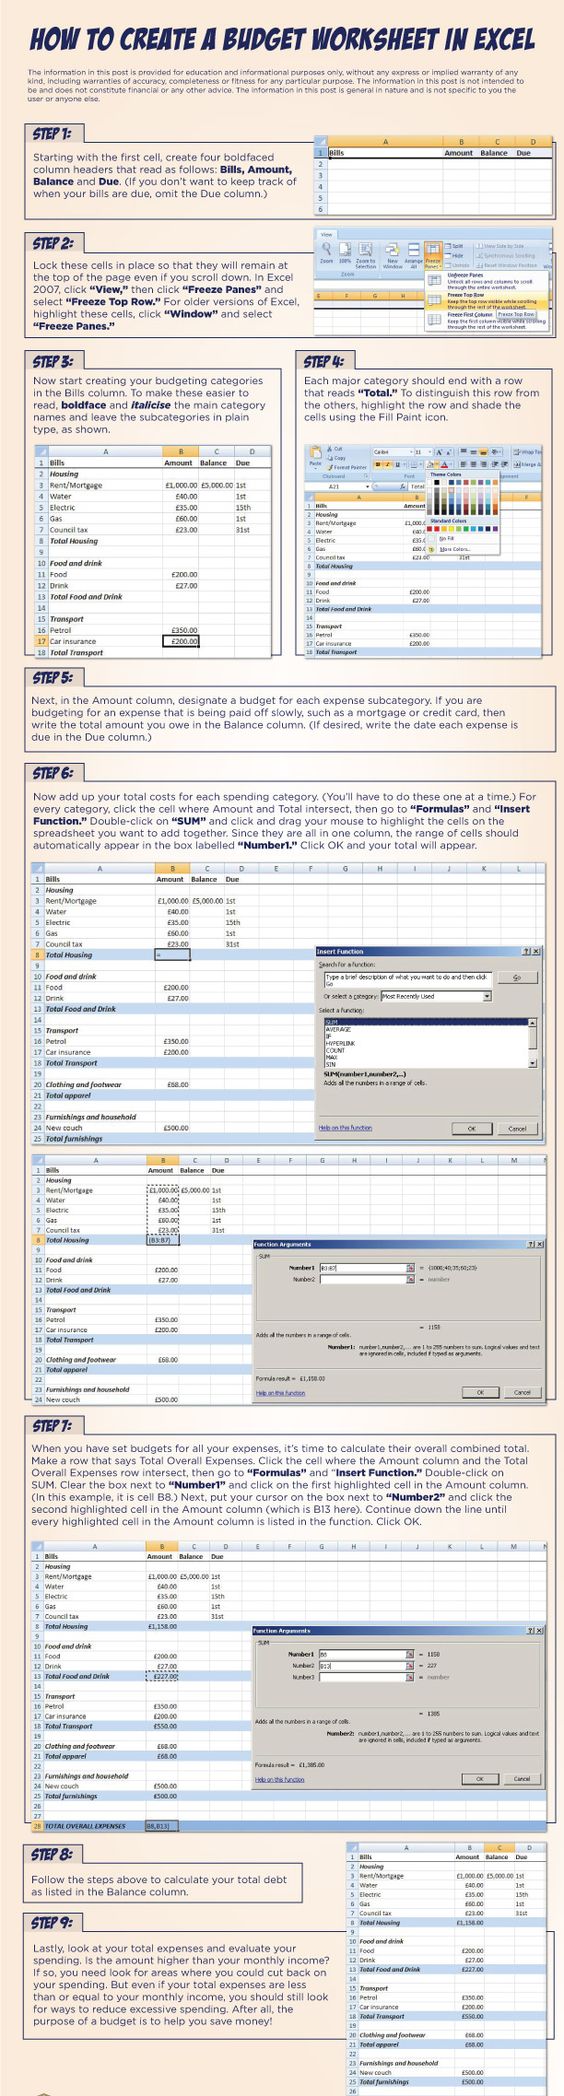 9 step by step instructions on how to create a budget worksheet in excel  